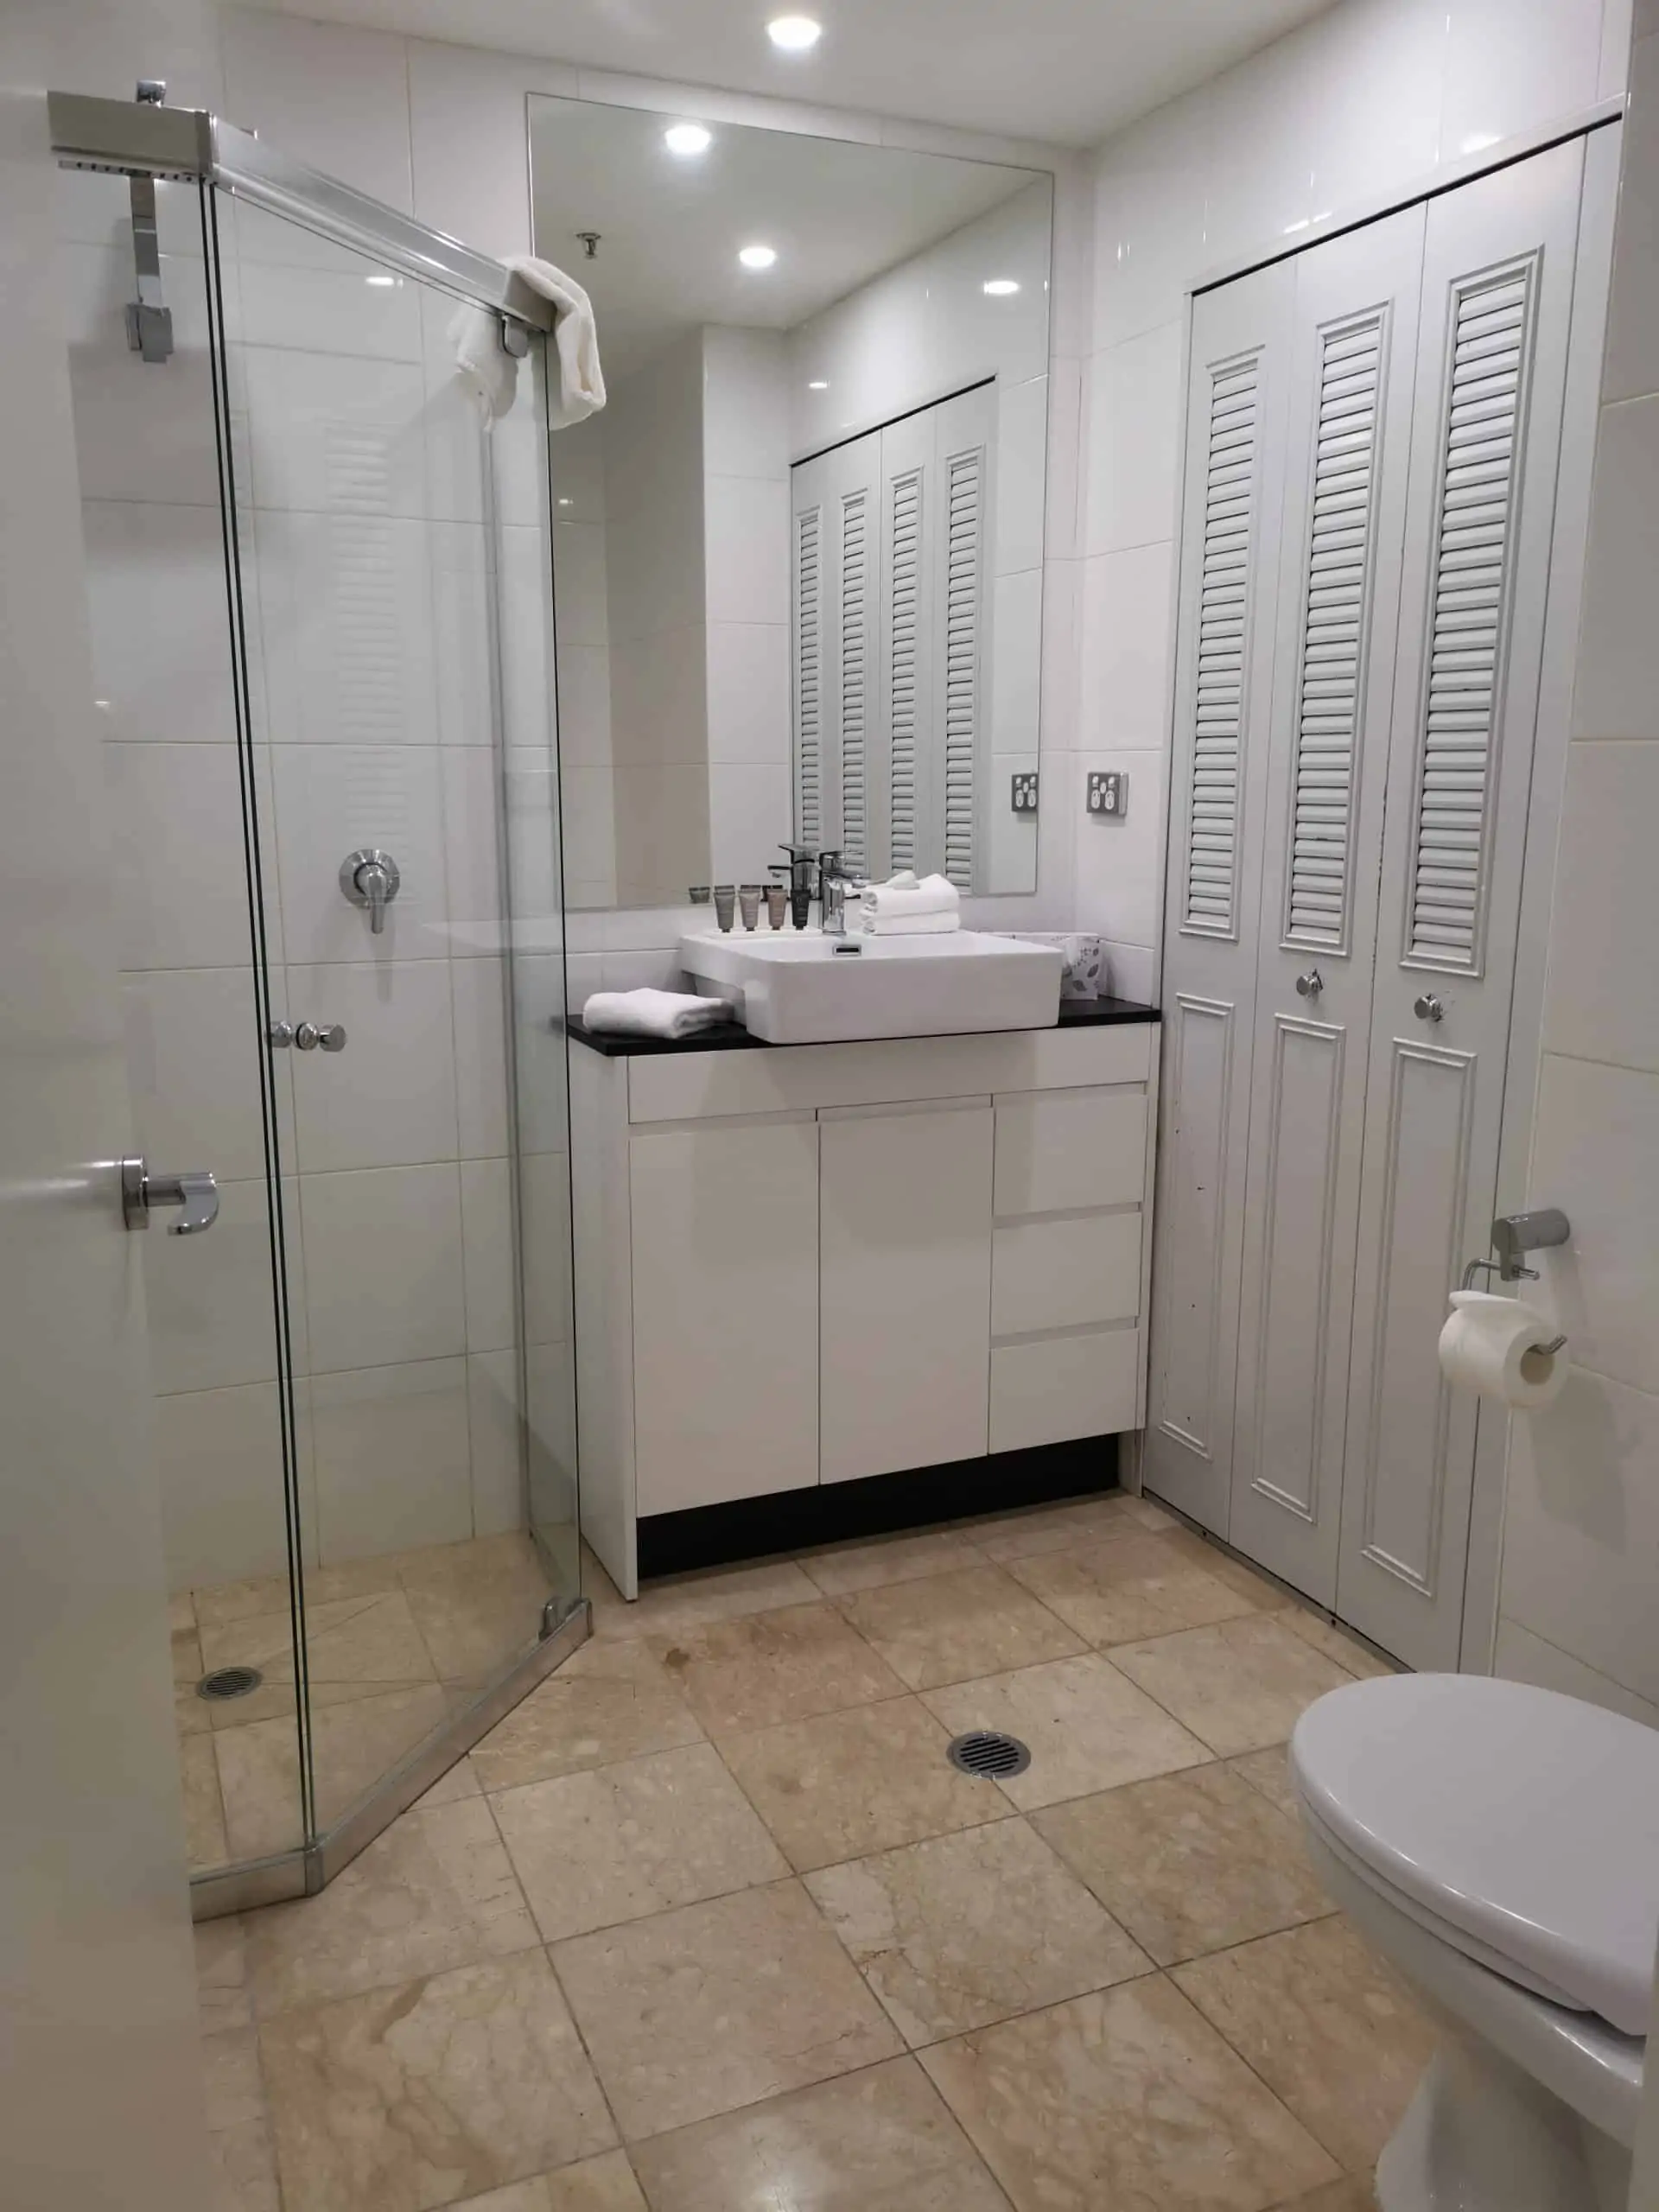 APX Hotels Apartments clean spacious nice and comfortable bathroom in APX Darling Harbour Sydney Australia